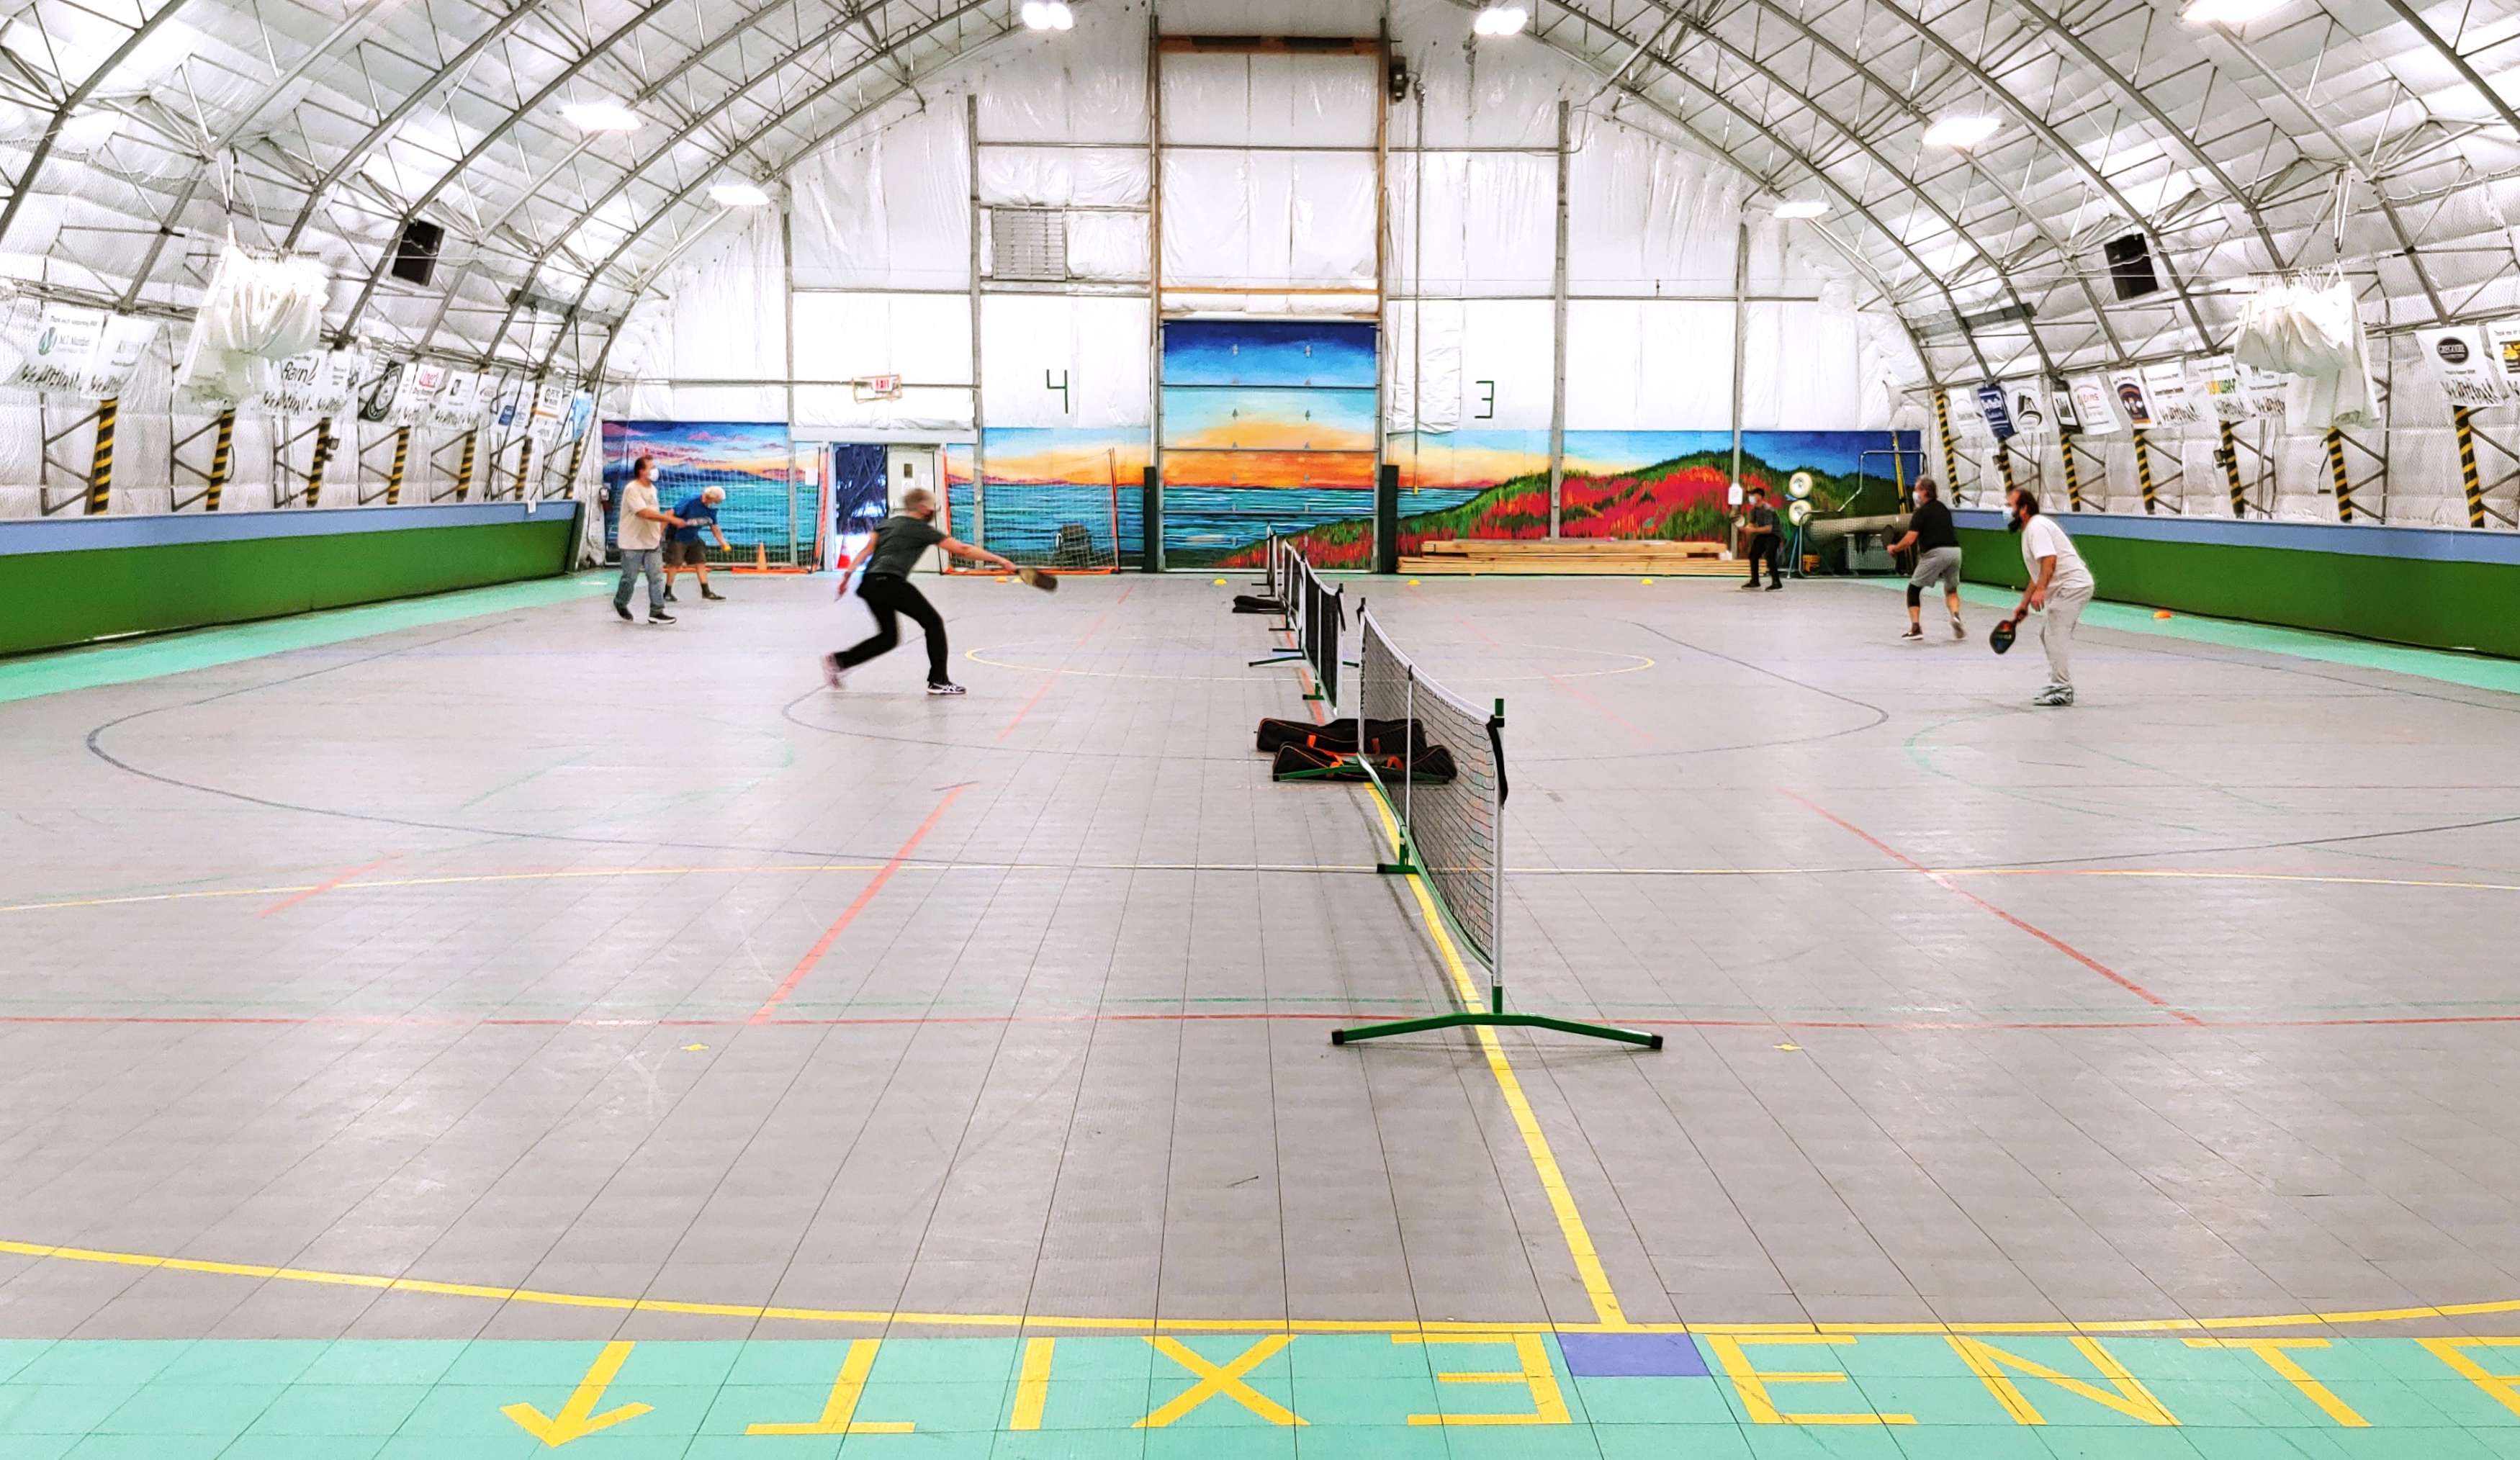 3 groups of adults playing pickleball on an indoor court